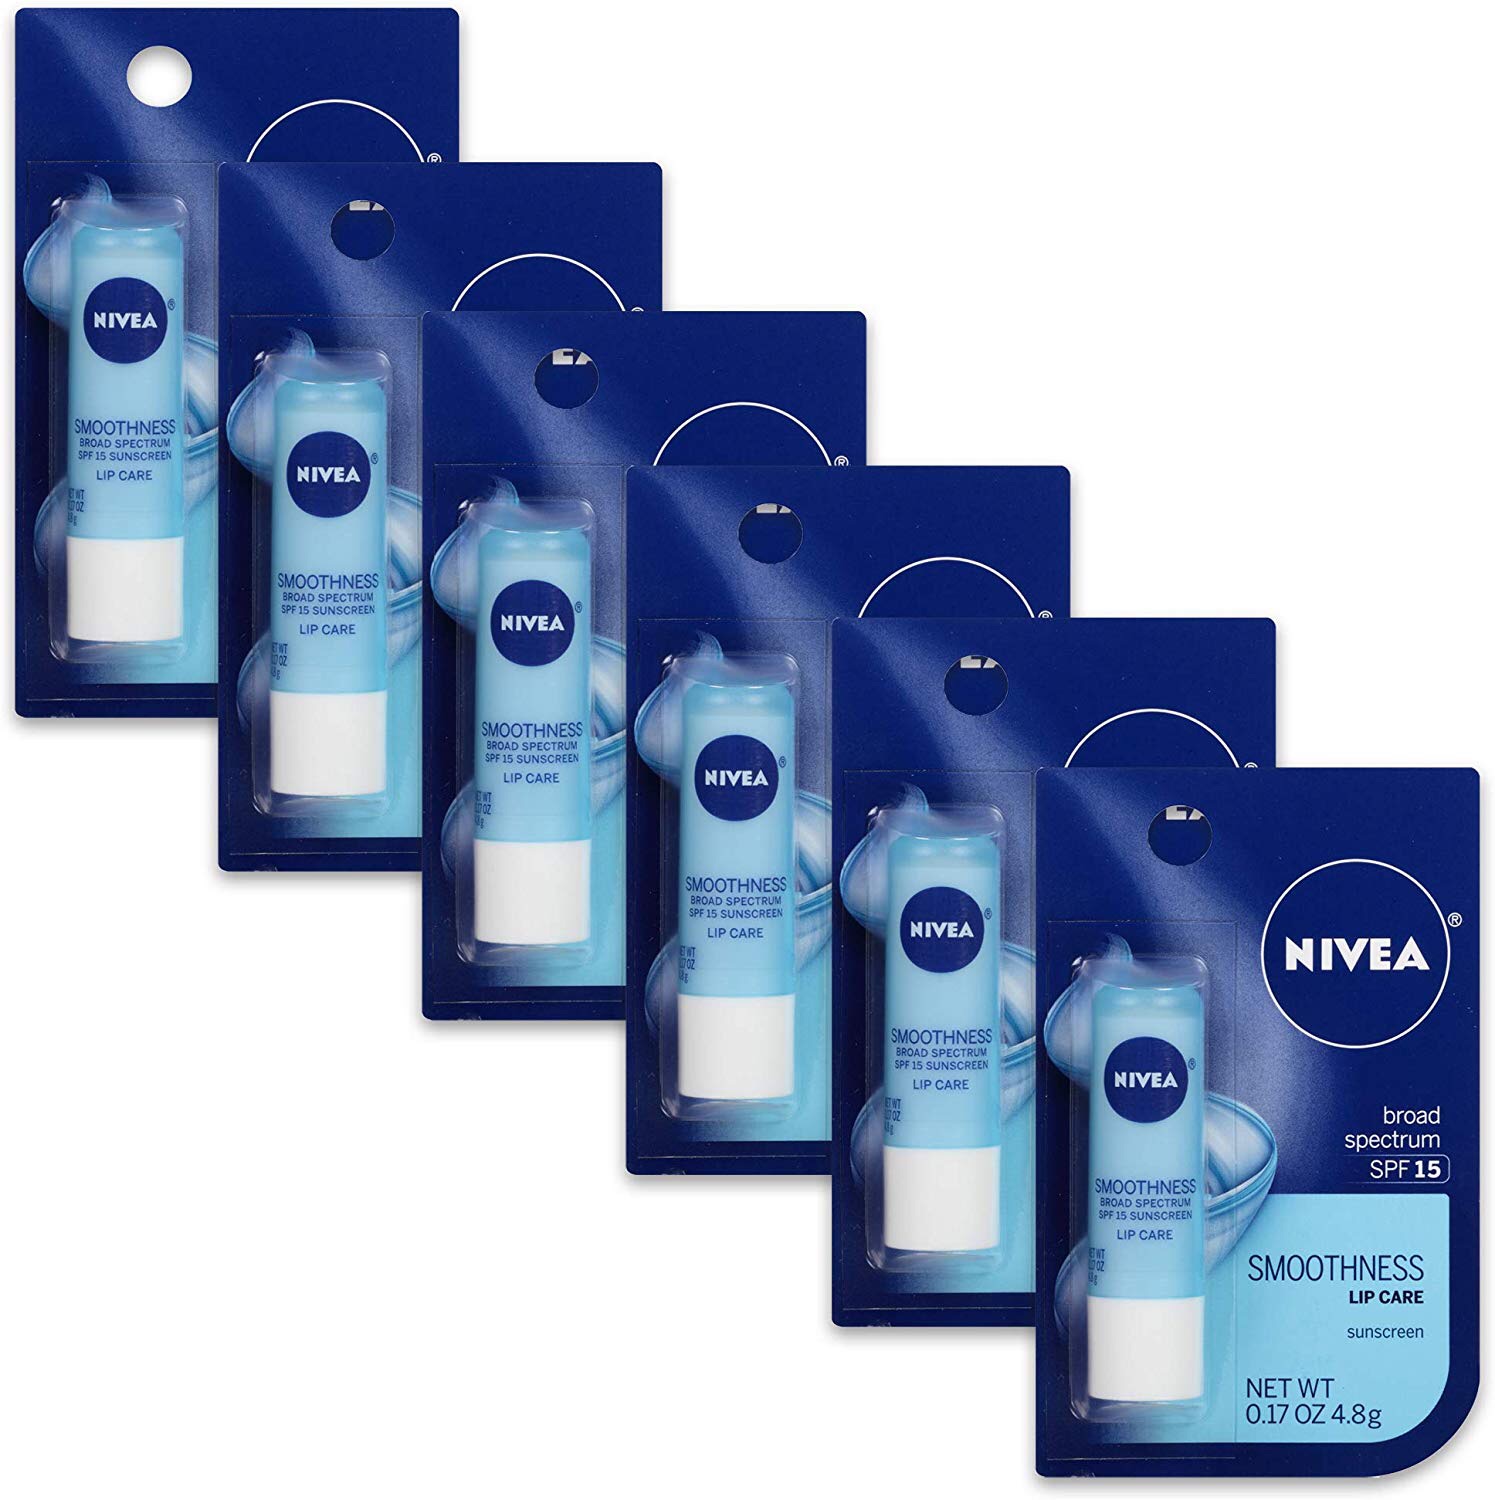 NIVEA Smoothness Lip Care SPF 15 0.17 Ounce Carded Pack (Pack of 6) 超滋潤補水保濕潤唇膏